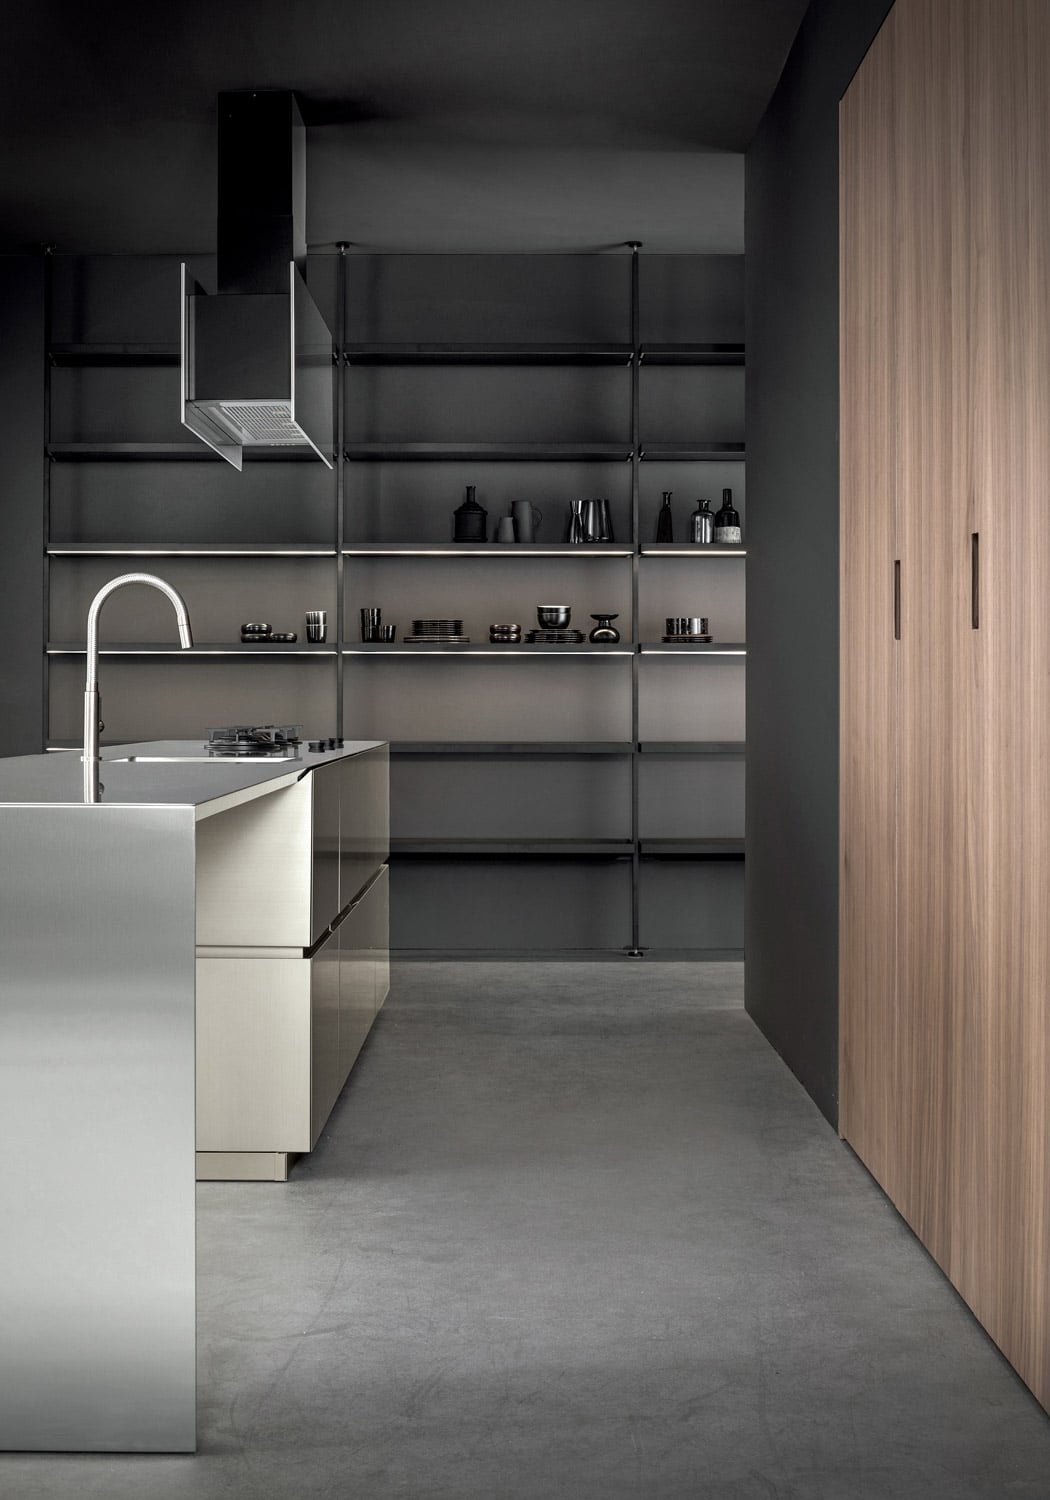 In the background, beyond the steel island, the wall is lined with a modern bookcase in black lacquered metal, with glass shelves and integrated led lights, bridging kitchen and living area.